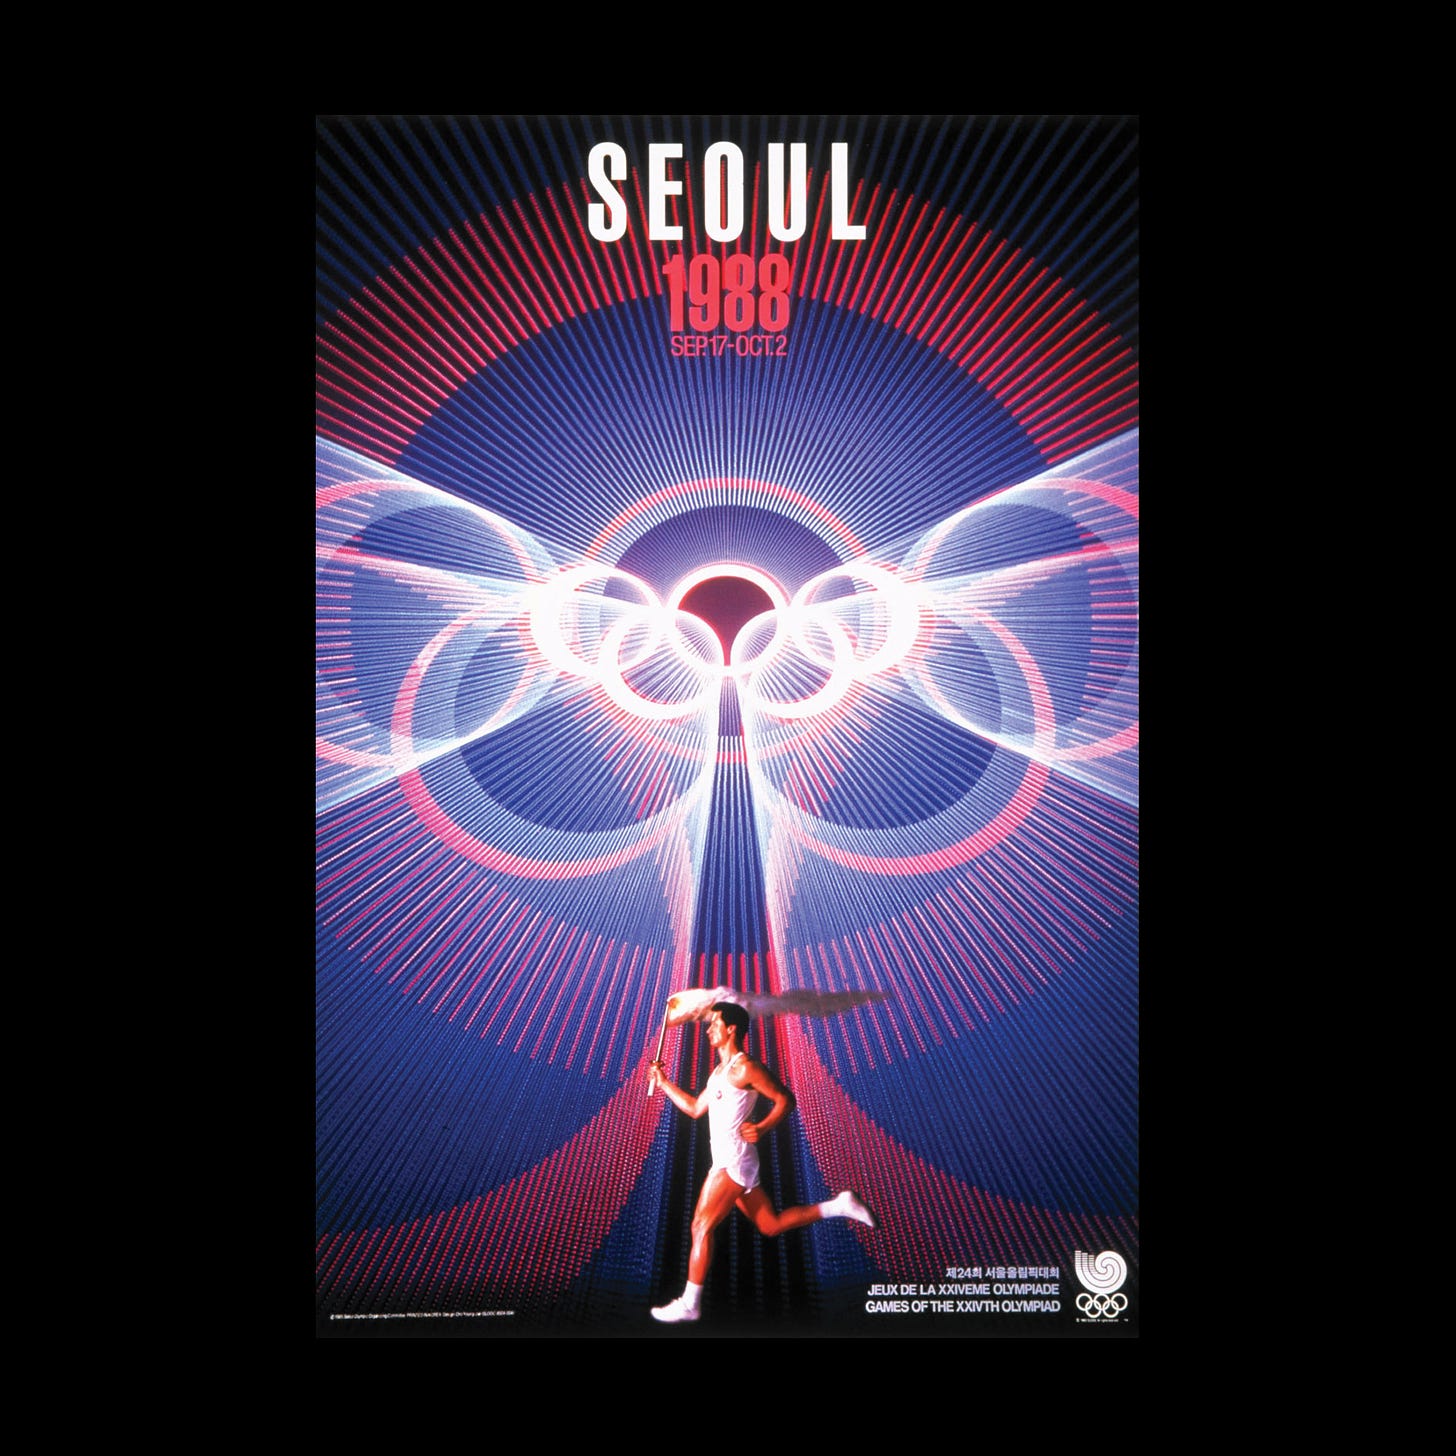 Poster for the Seoul '88 Olympic Games